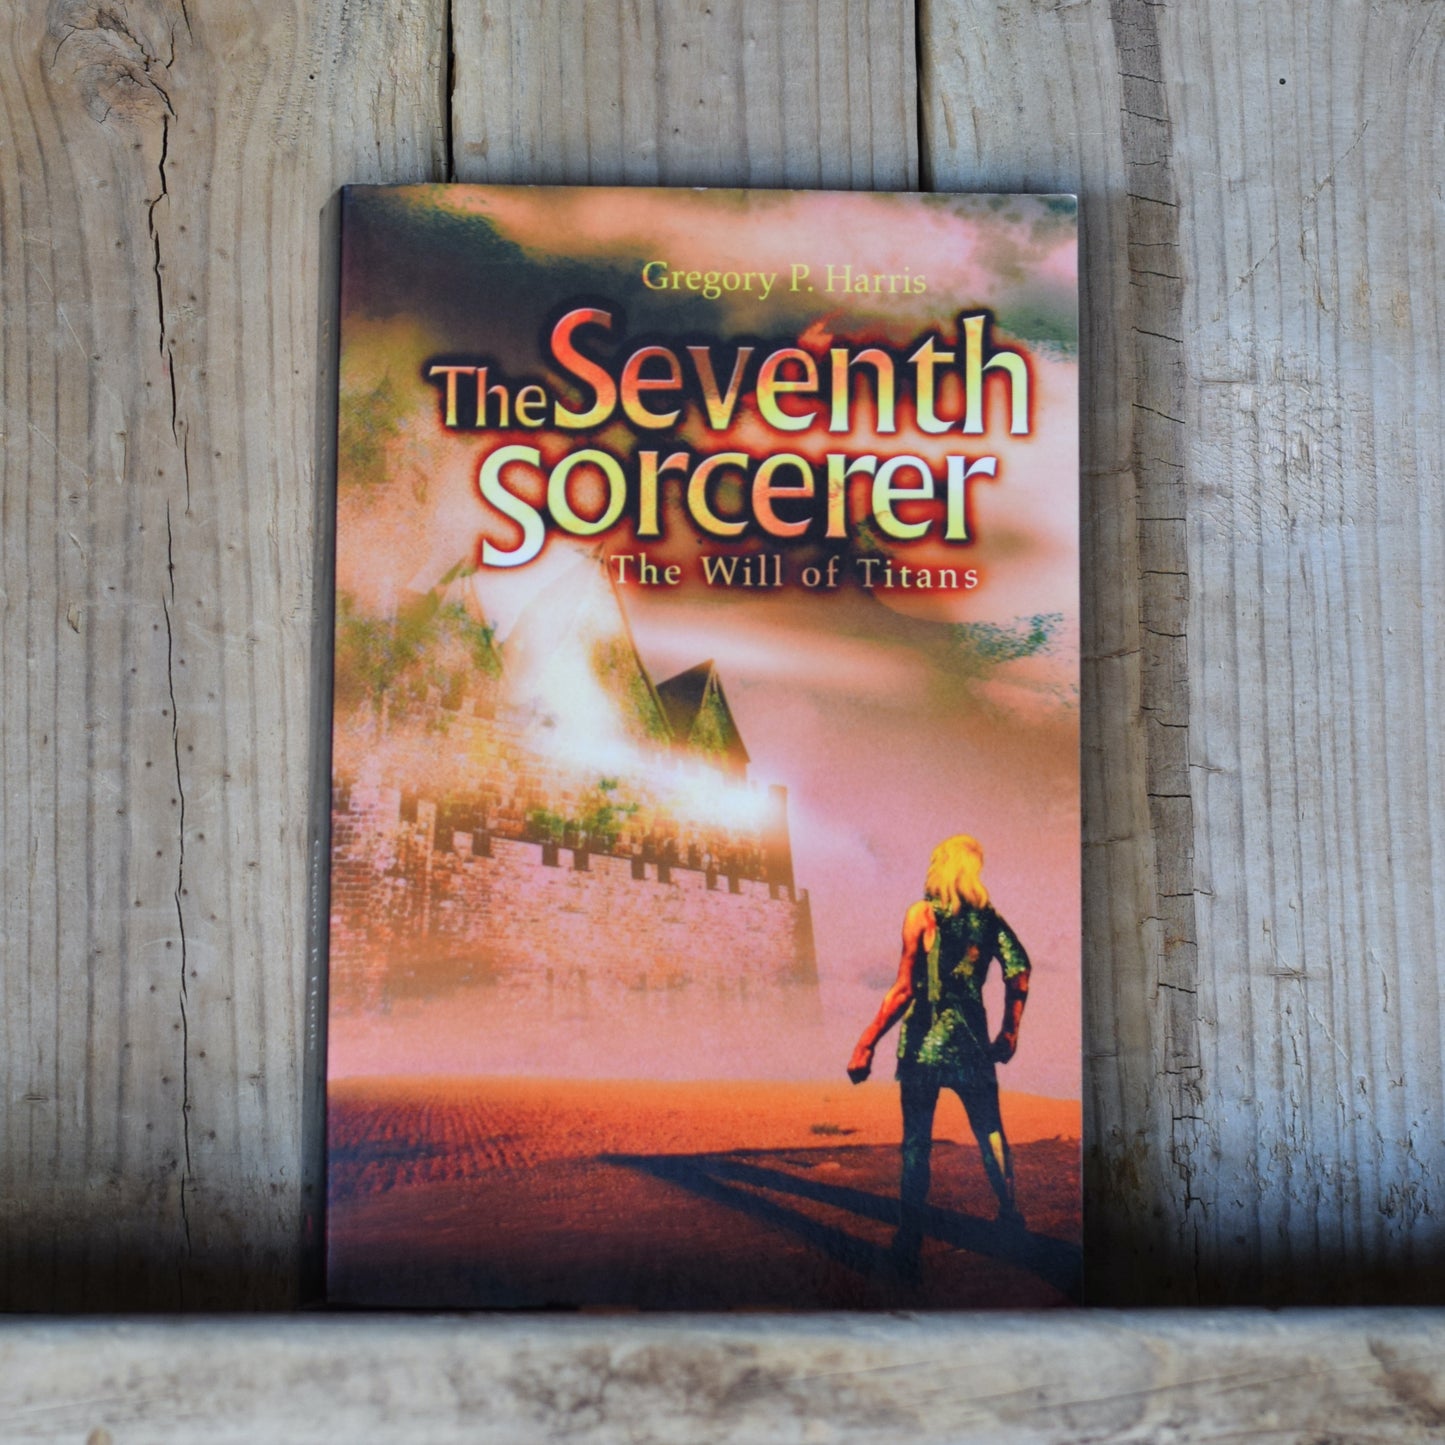 Fantasy Paperback: Gregory P Harris - The Seventh Sorcerer, The Will of Titans